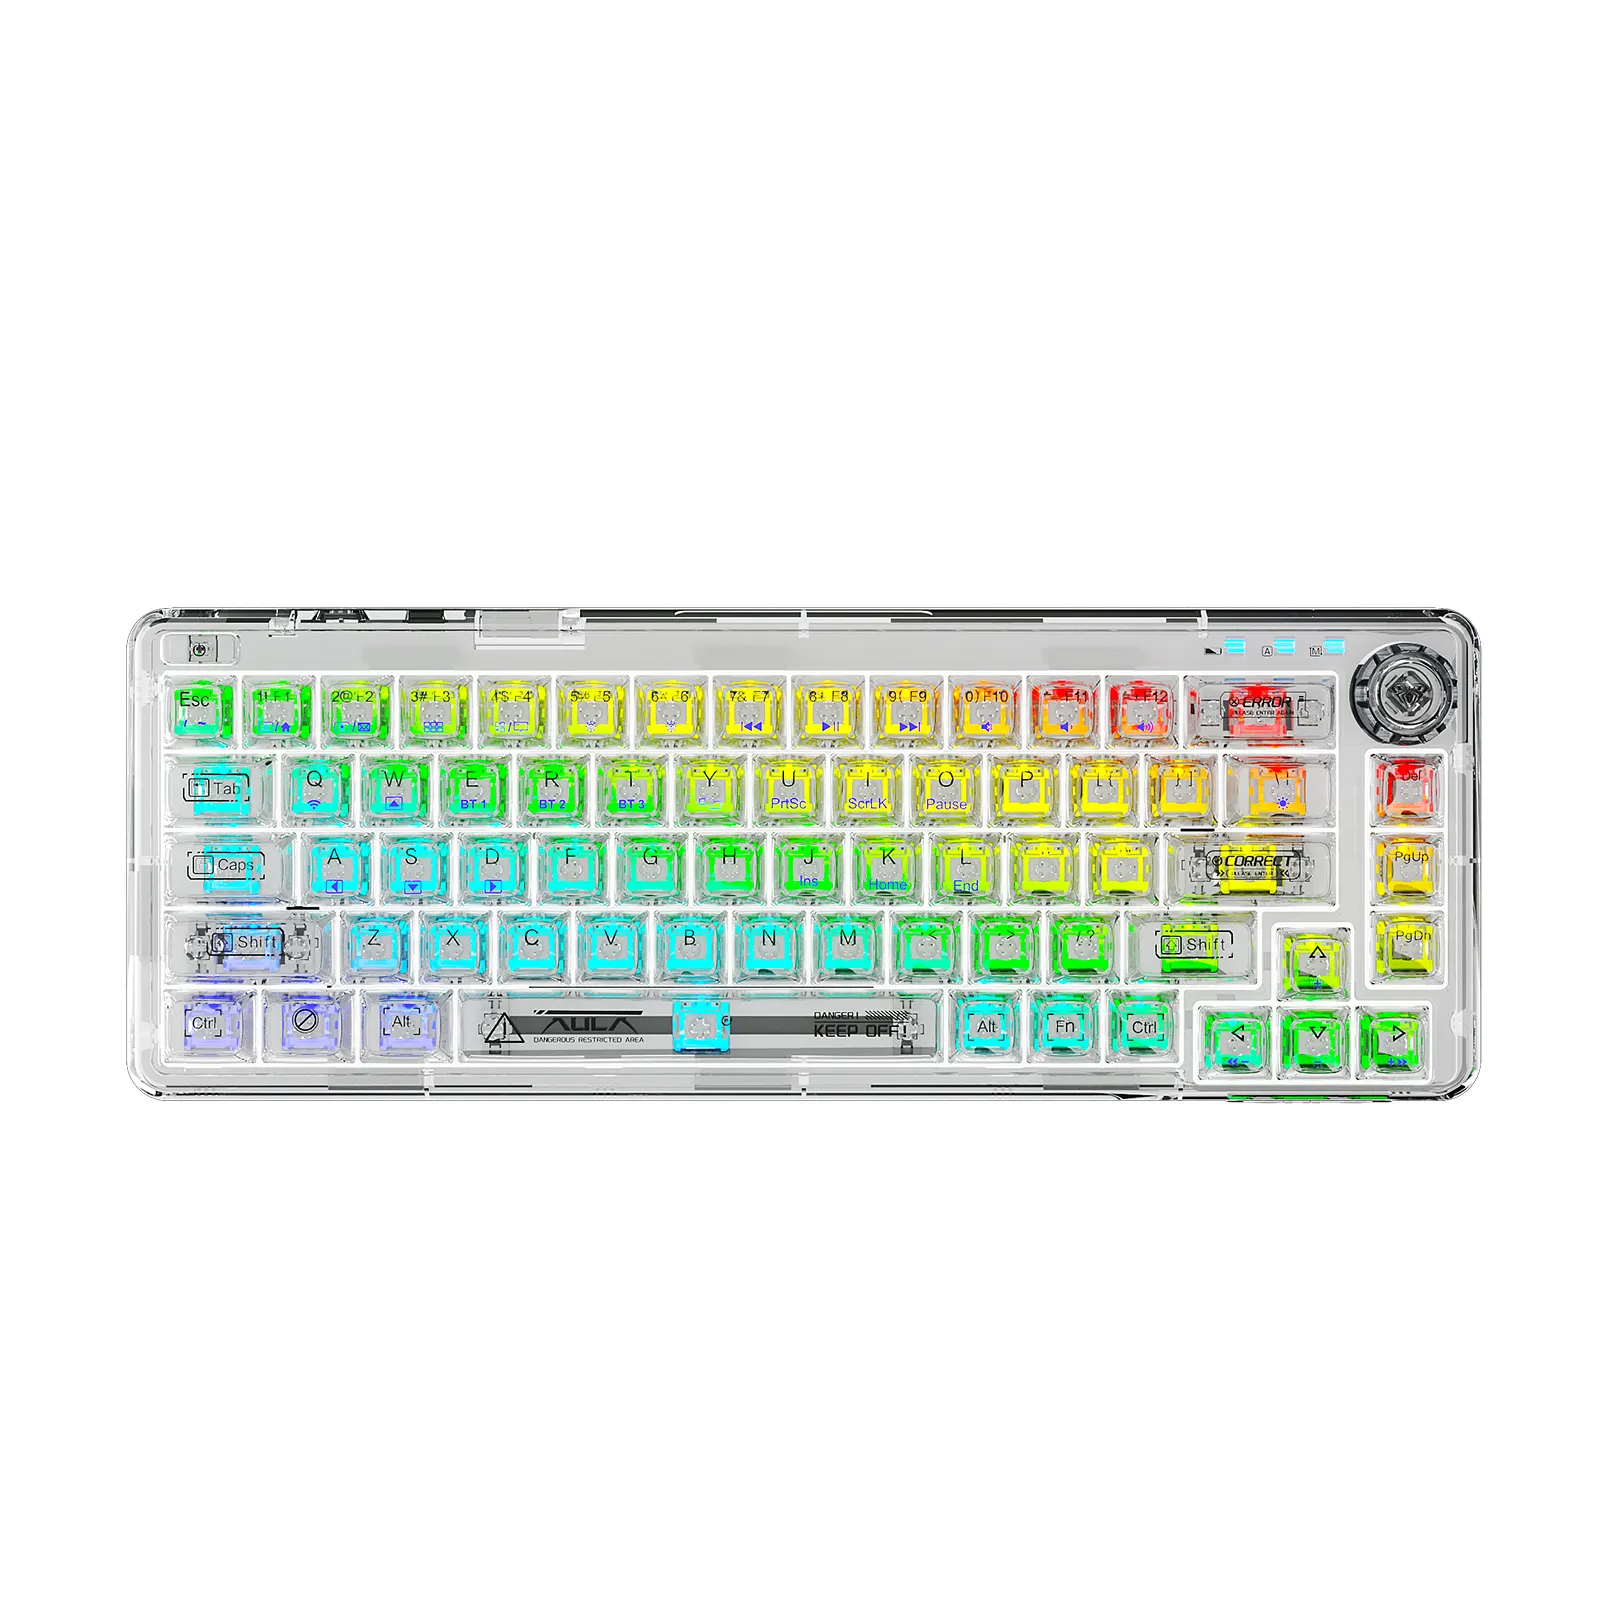 AULA F68 GASKET 3 in 1 Hot Swappable Mechanical White Gaming transparent Keyboard with RGB light,2.4G & BT5.0 & USB-C for gamer